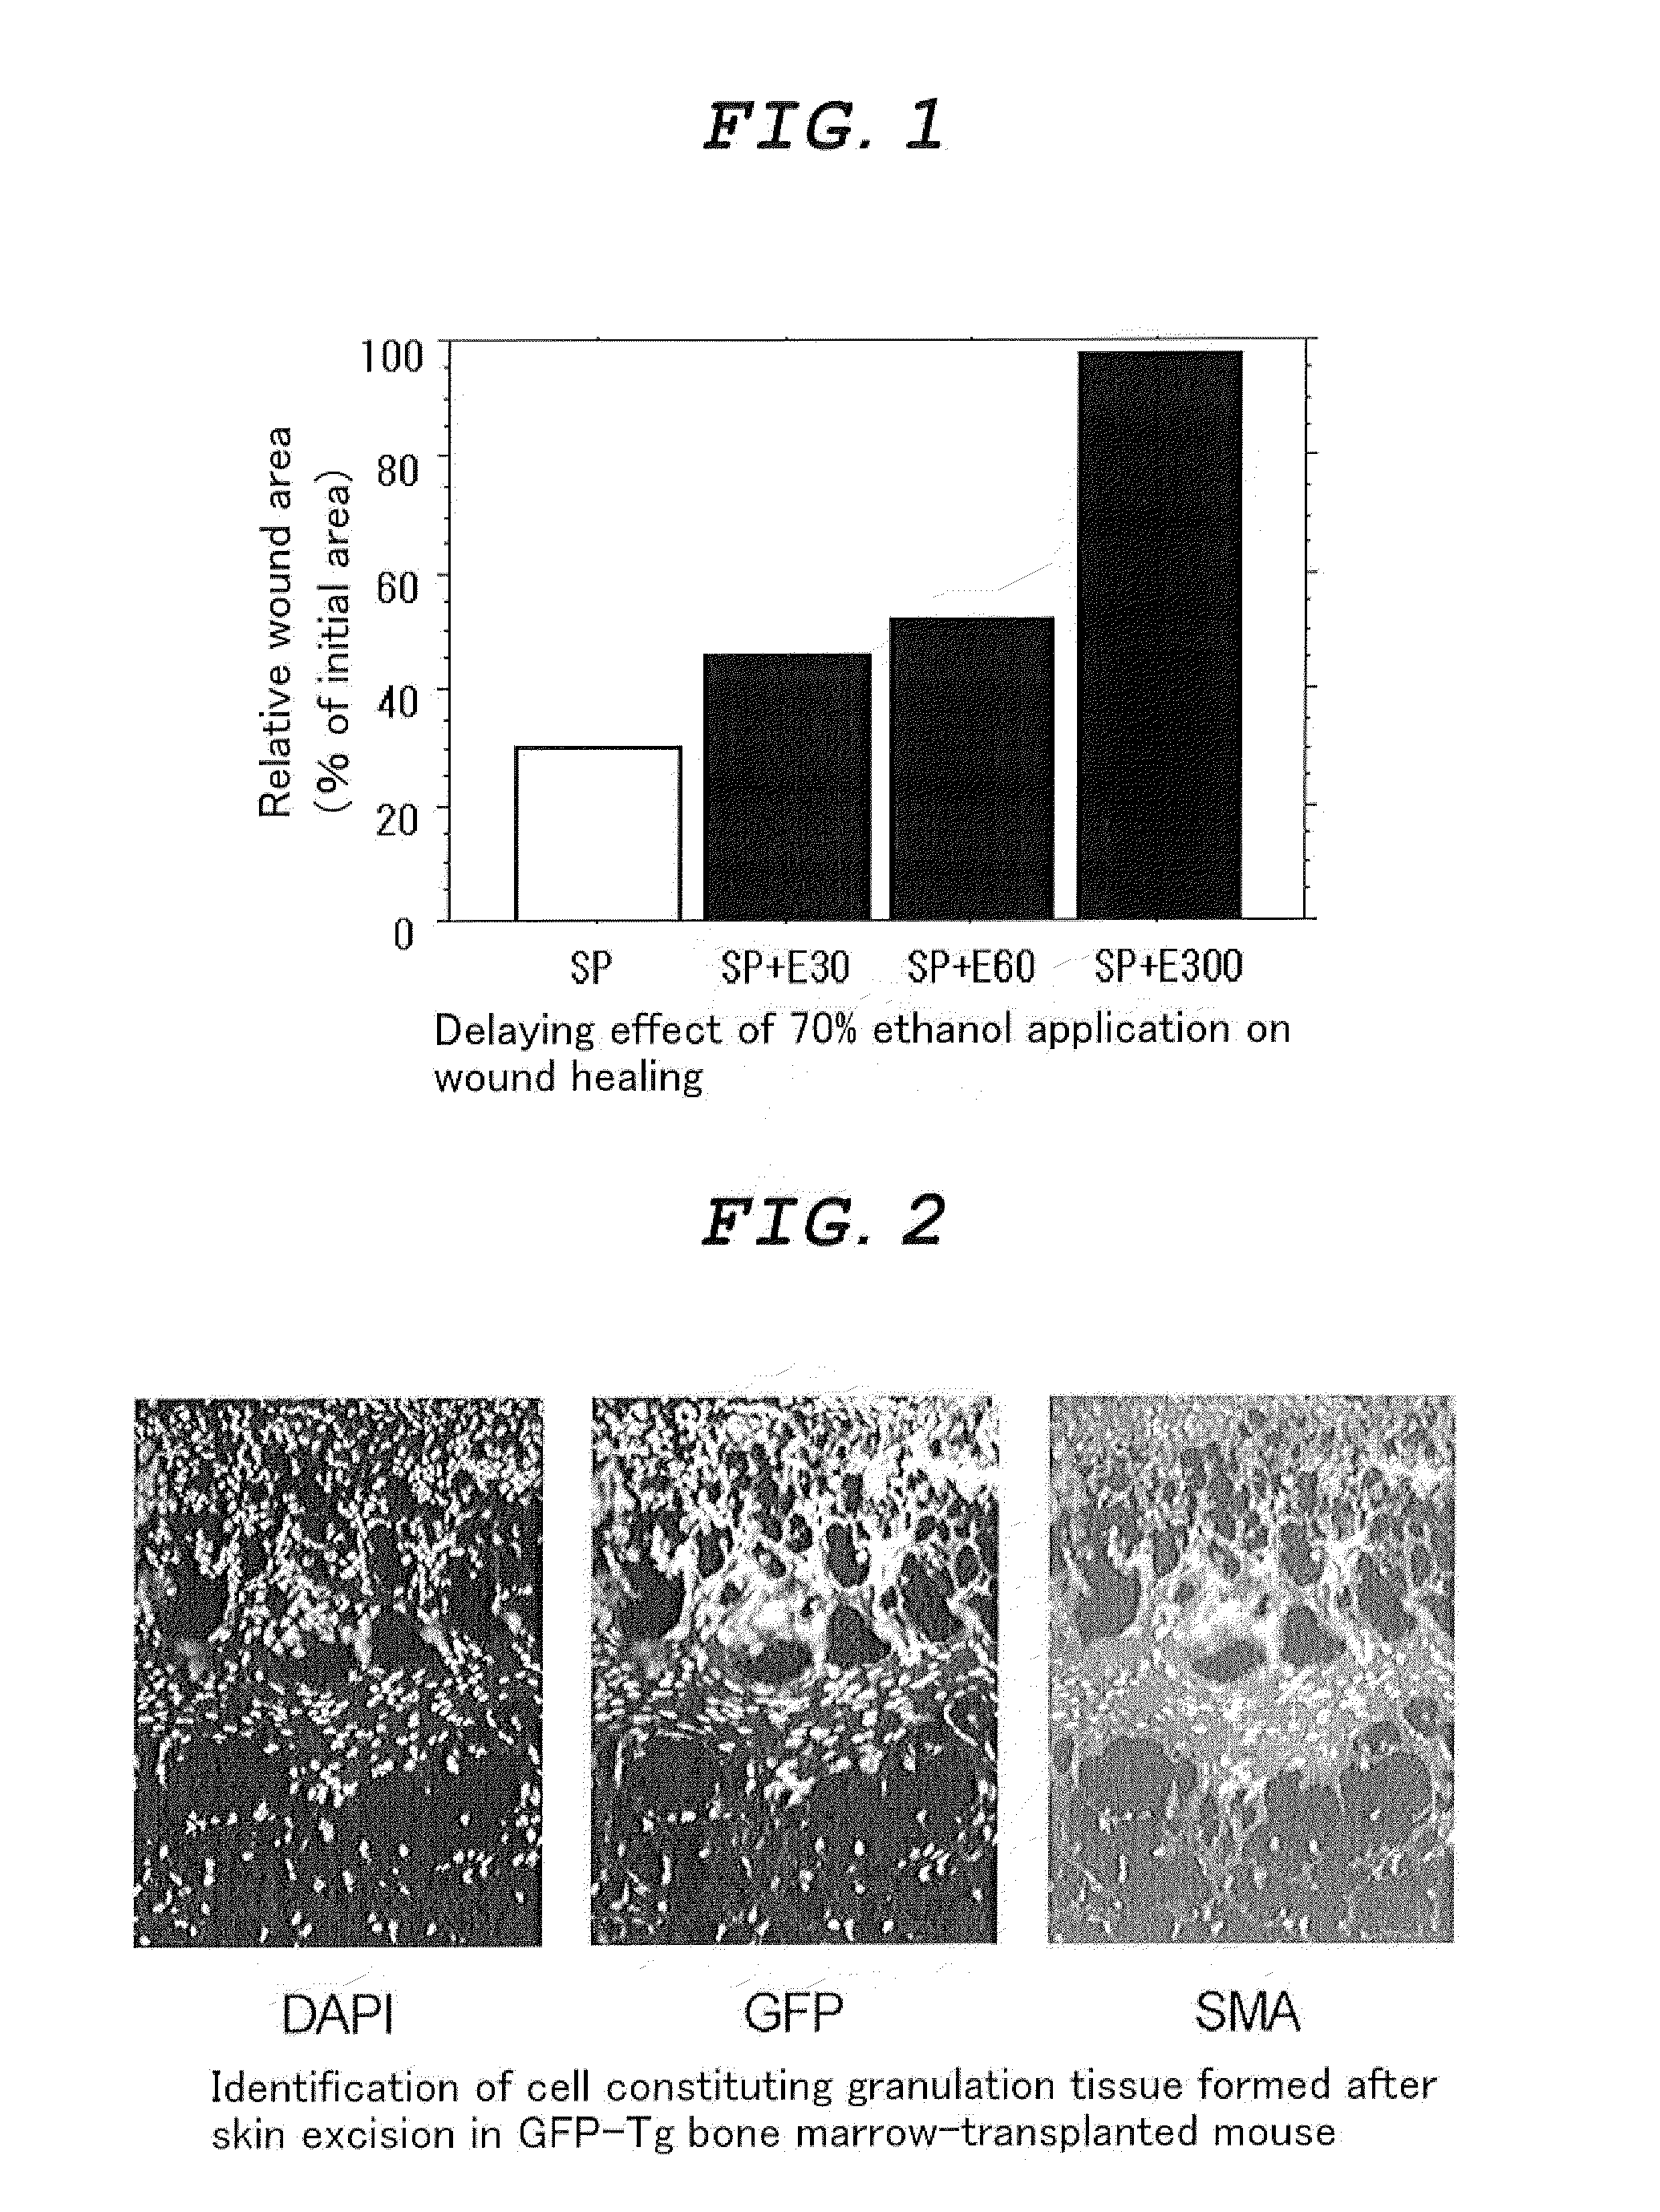 External Agent for Treatment of Skin Ulcer